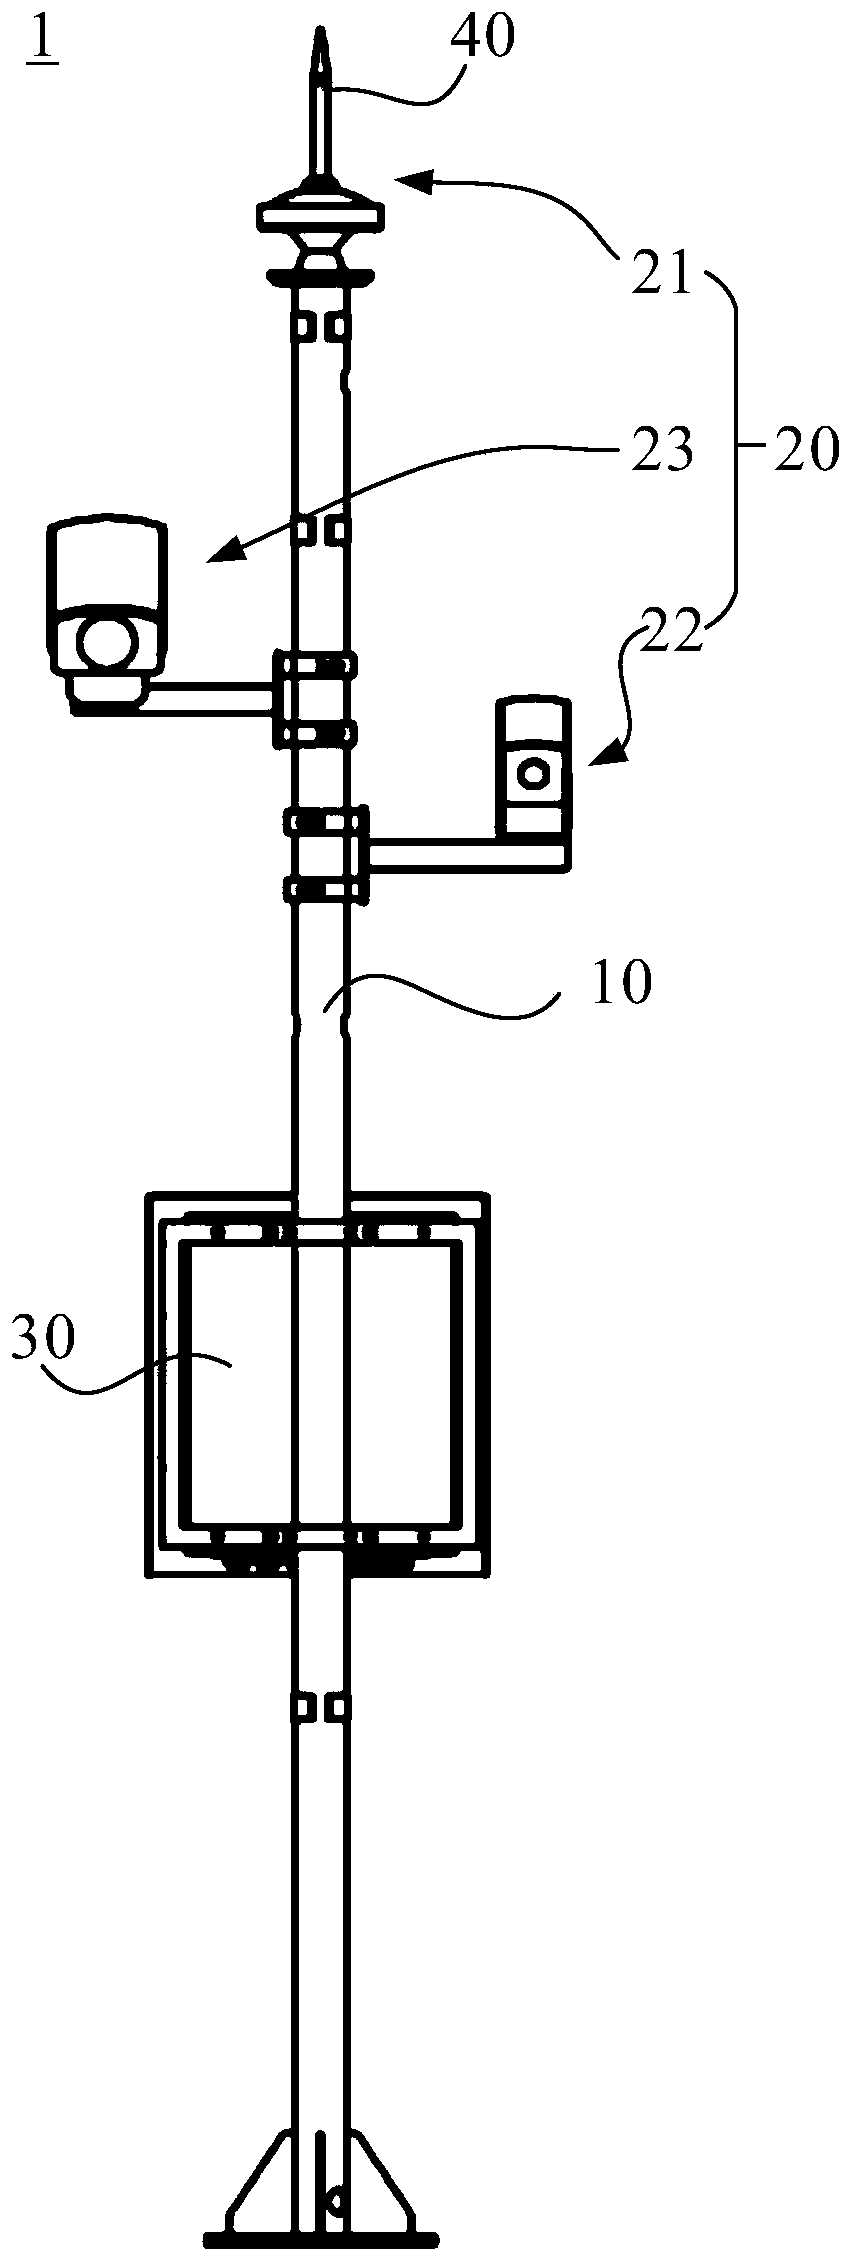 Meteorological observation device and system